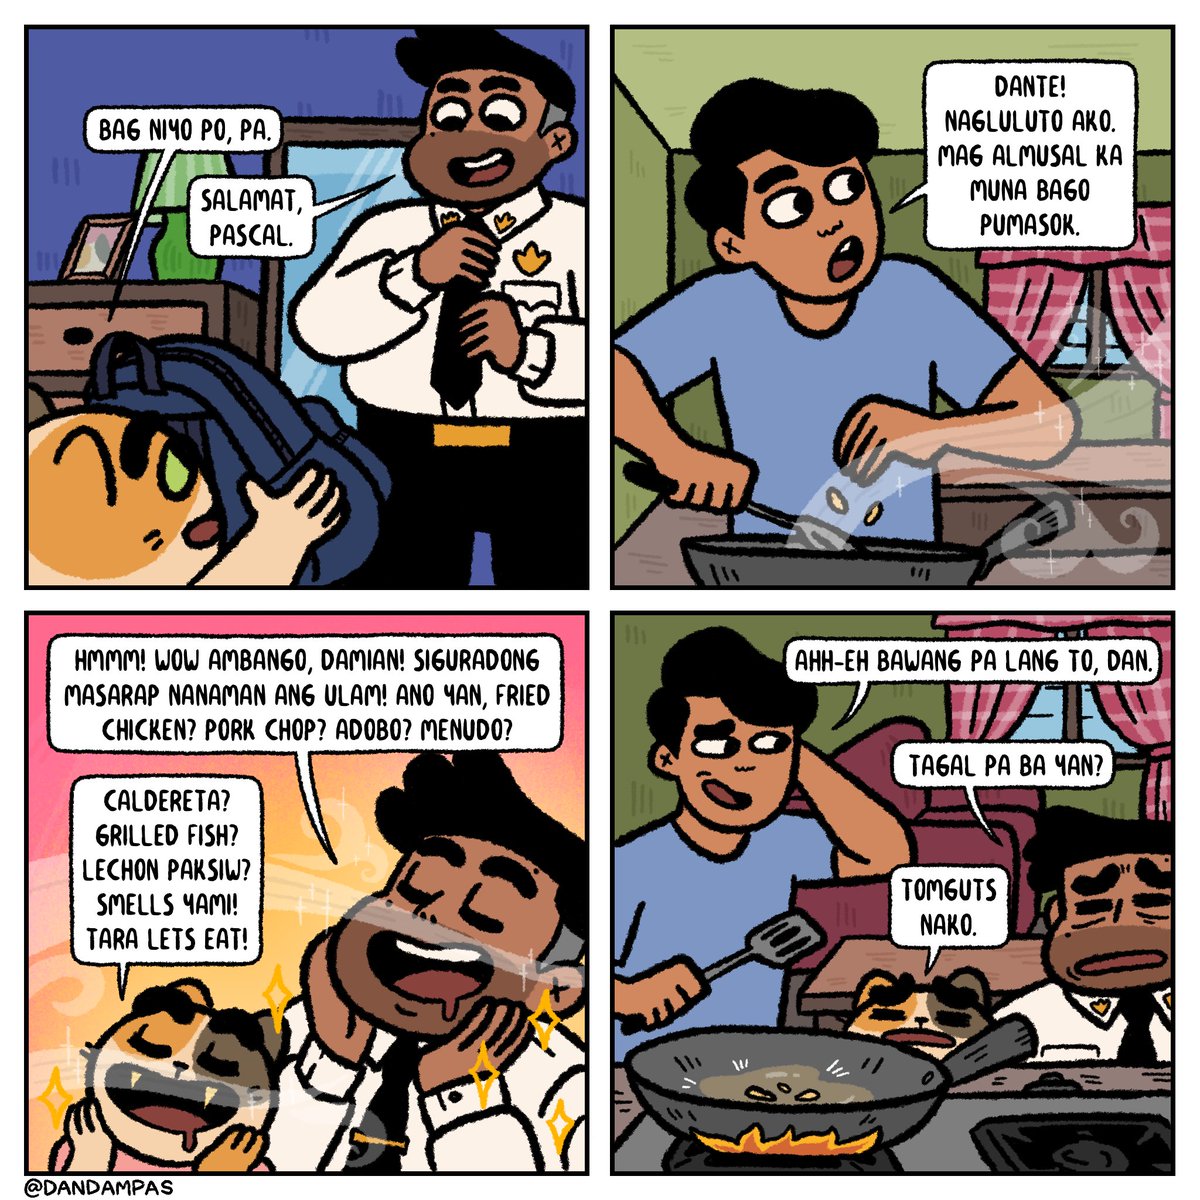 Ano ulam niyo today? 😅

Redraw of the very first ep of dandampas to celebrate our 2 yr anniv 💛 we've come so far and it's all thanks to you guys! Maraming salamat sa inyong suporta 💛😊#dandampas1 #dandampascomics 